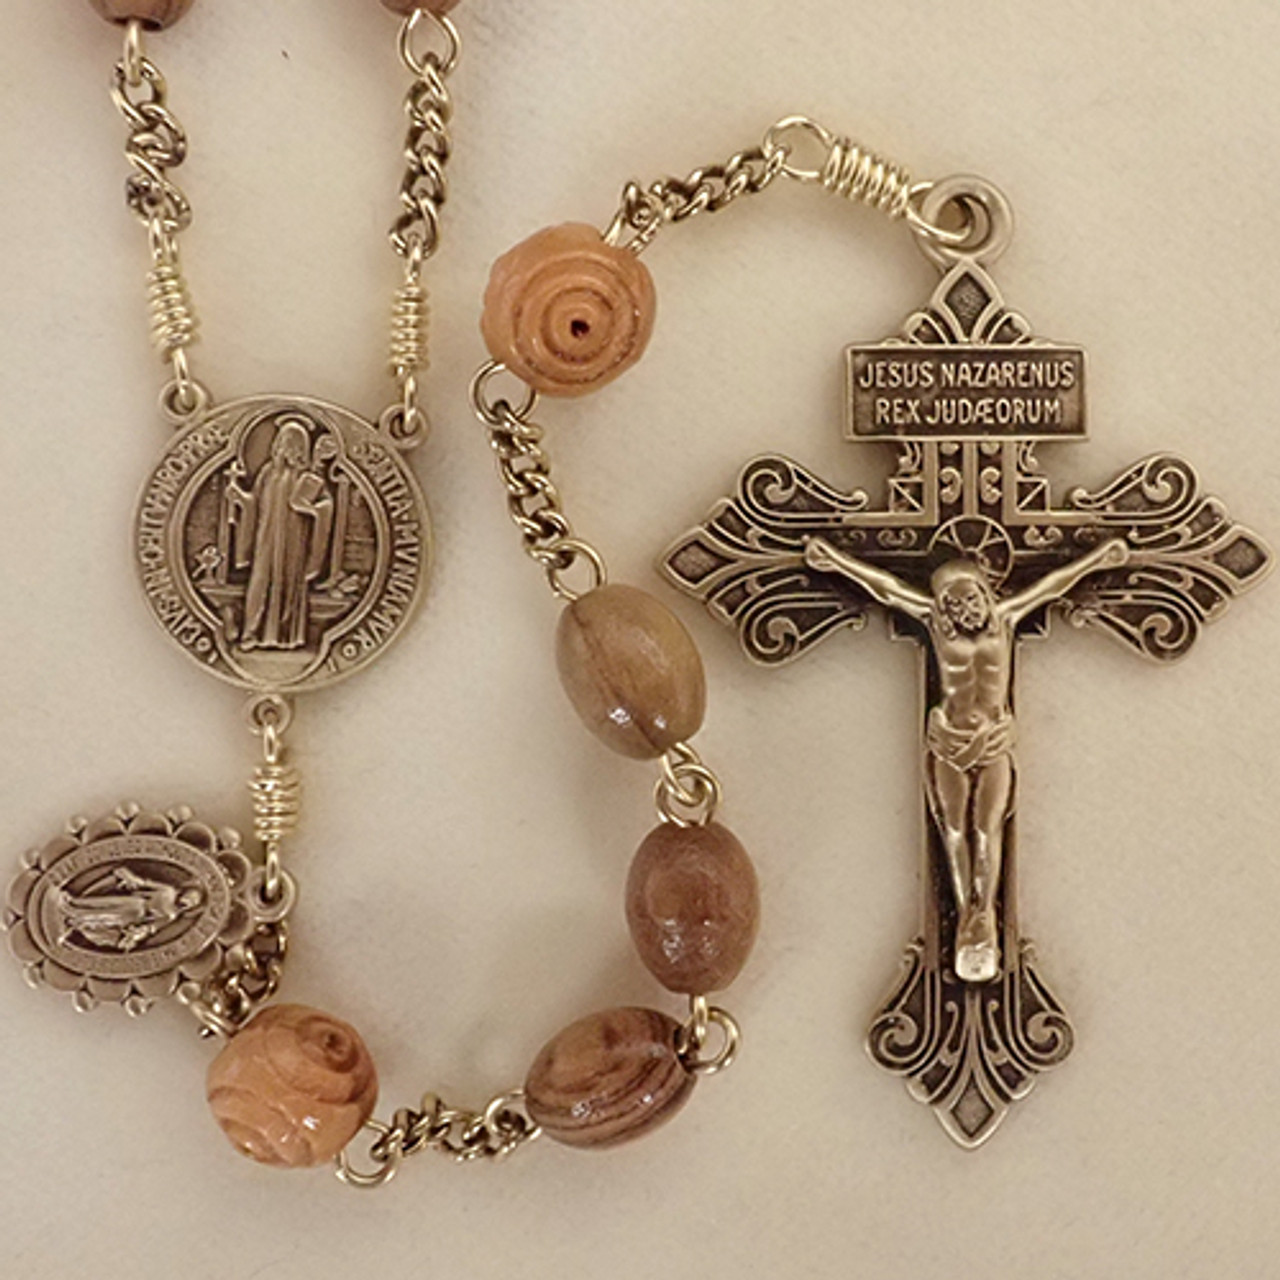 Italian Rosary Making Kit for 5 Rosaries - Catholic Rosary Cross and Center  Sets with 2” Pardon Crucifix with Sacramental Medals (Miraculous Medal and